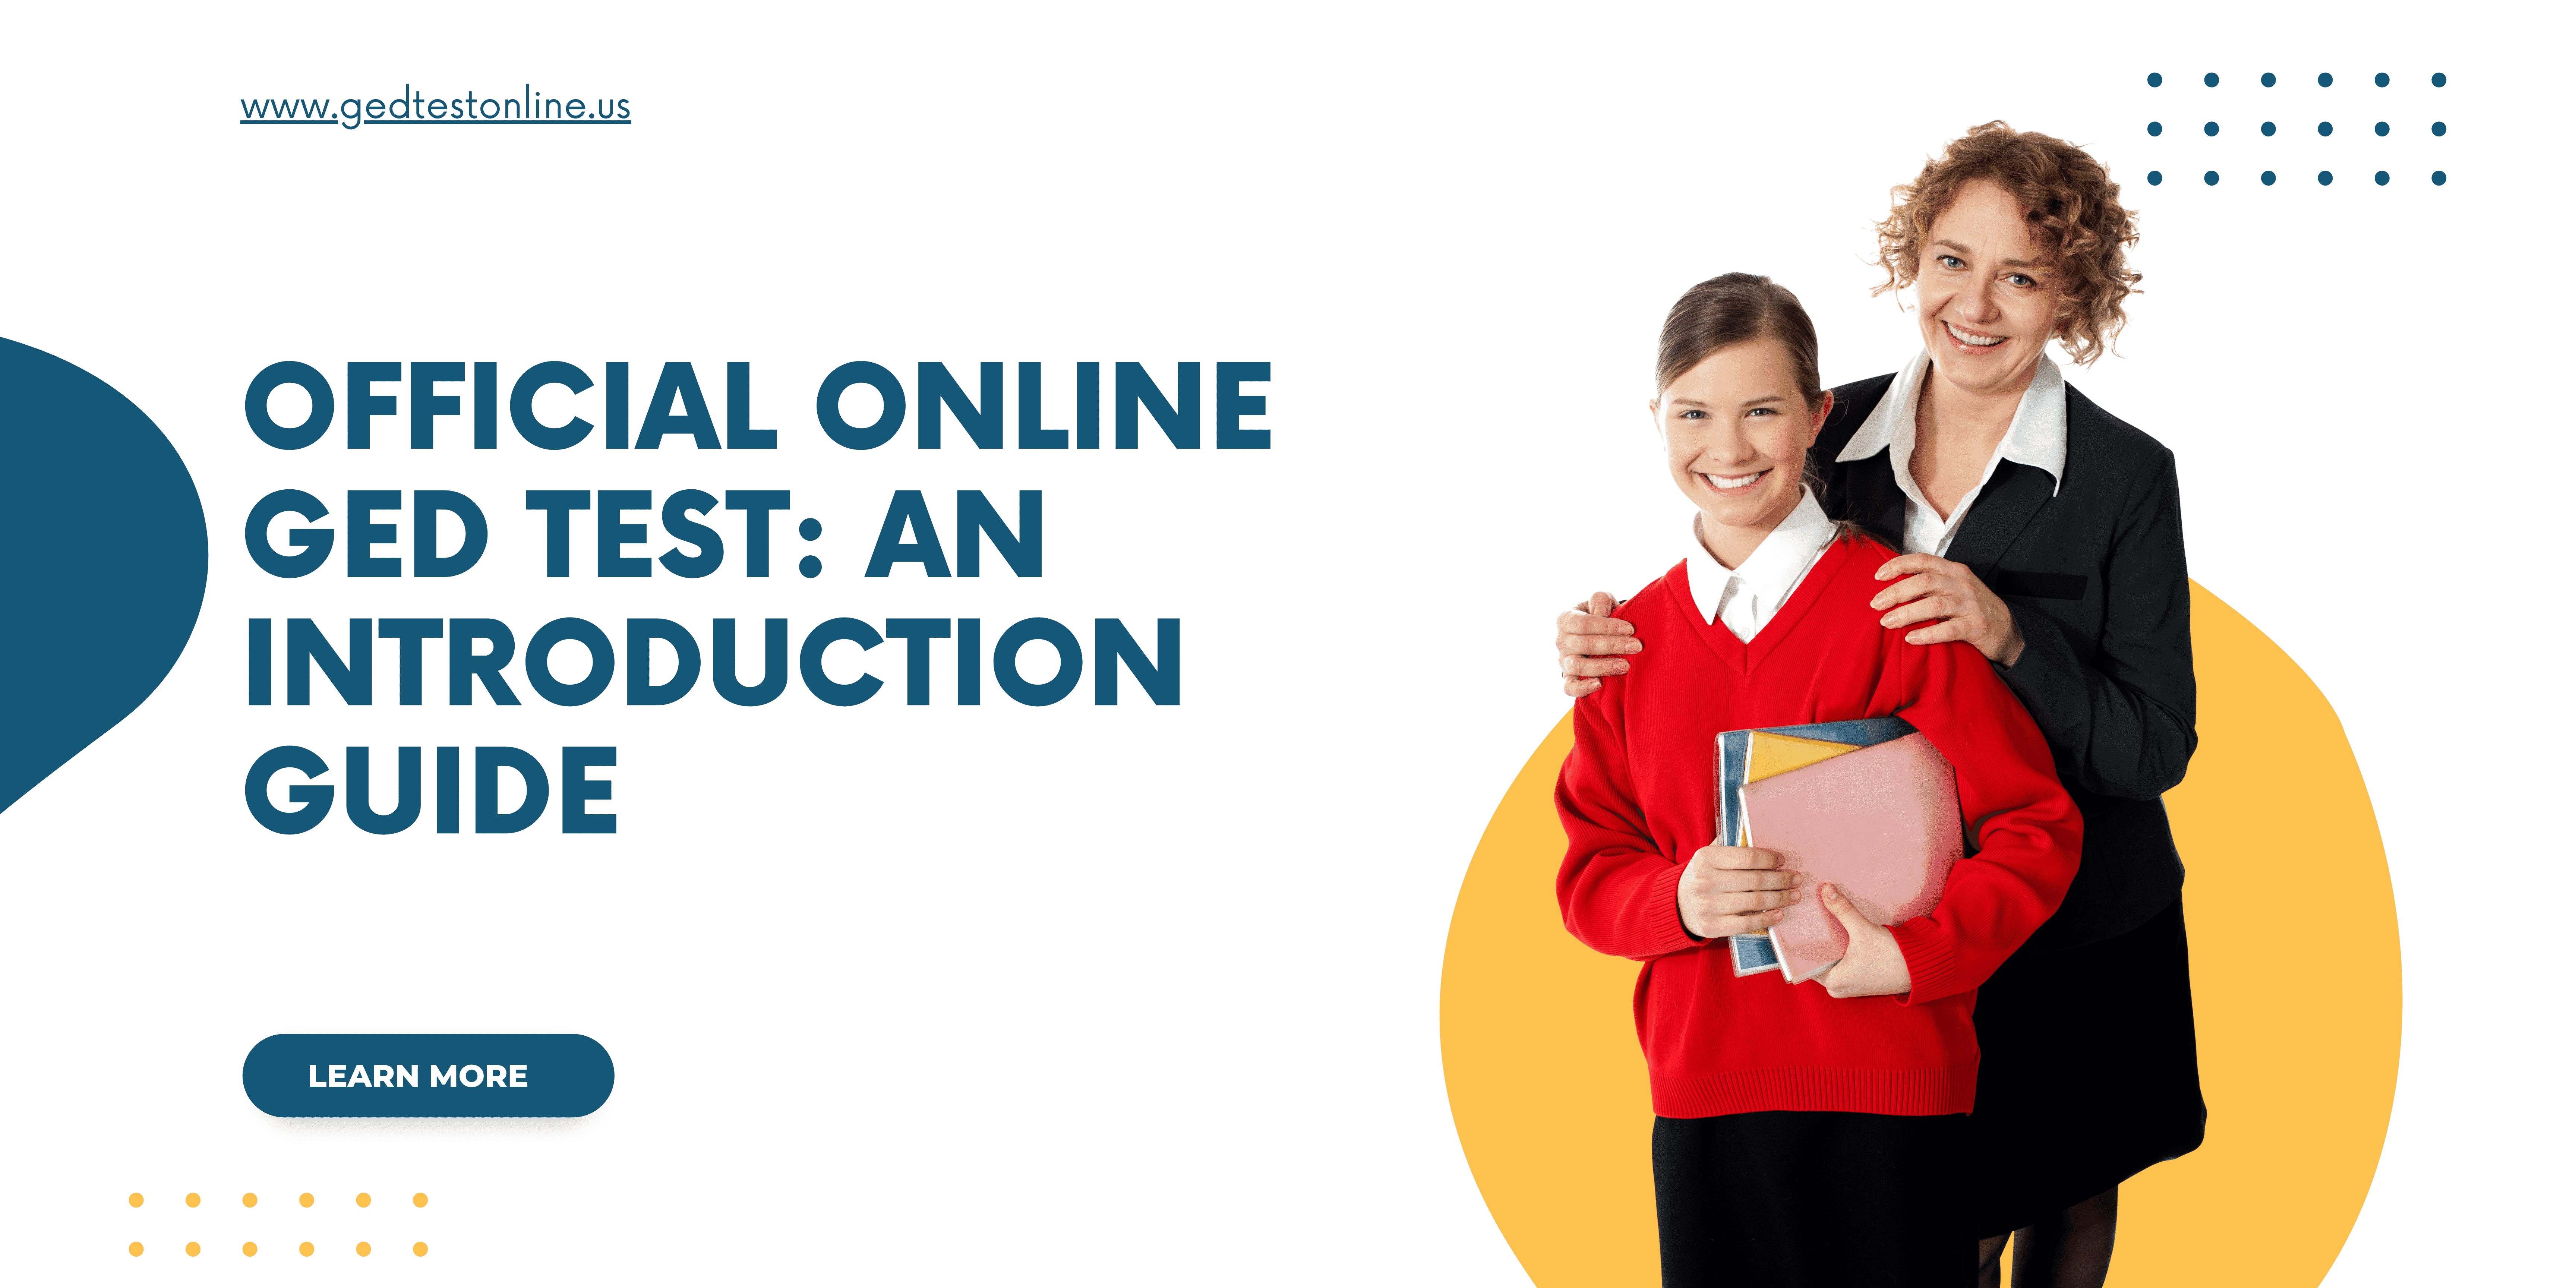 The Official Online GED Test: An Introduction